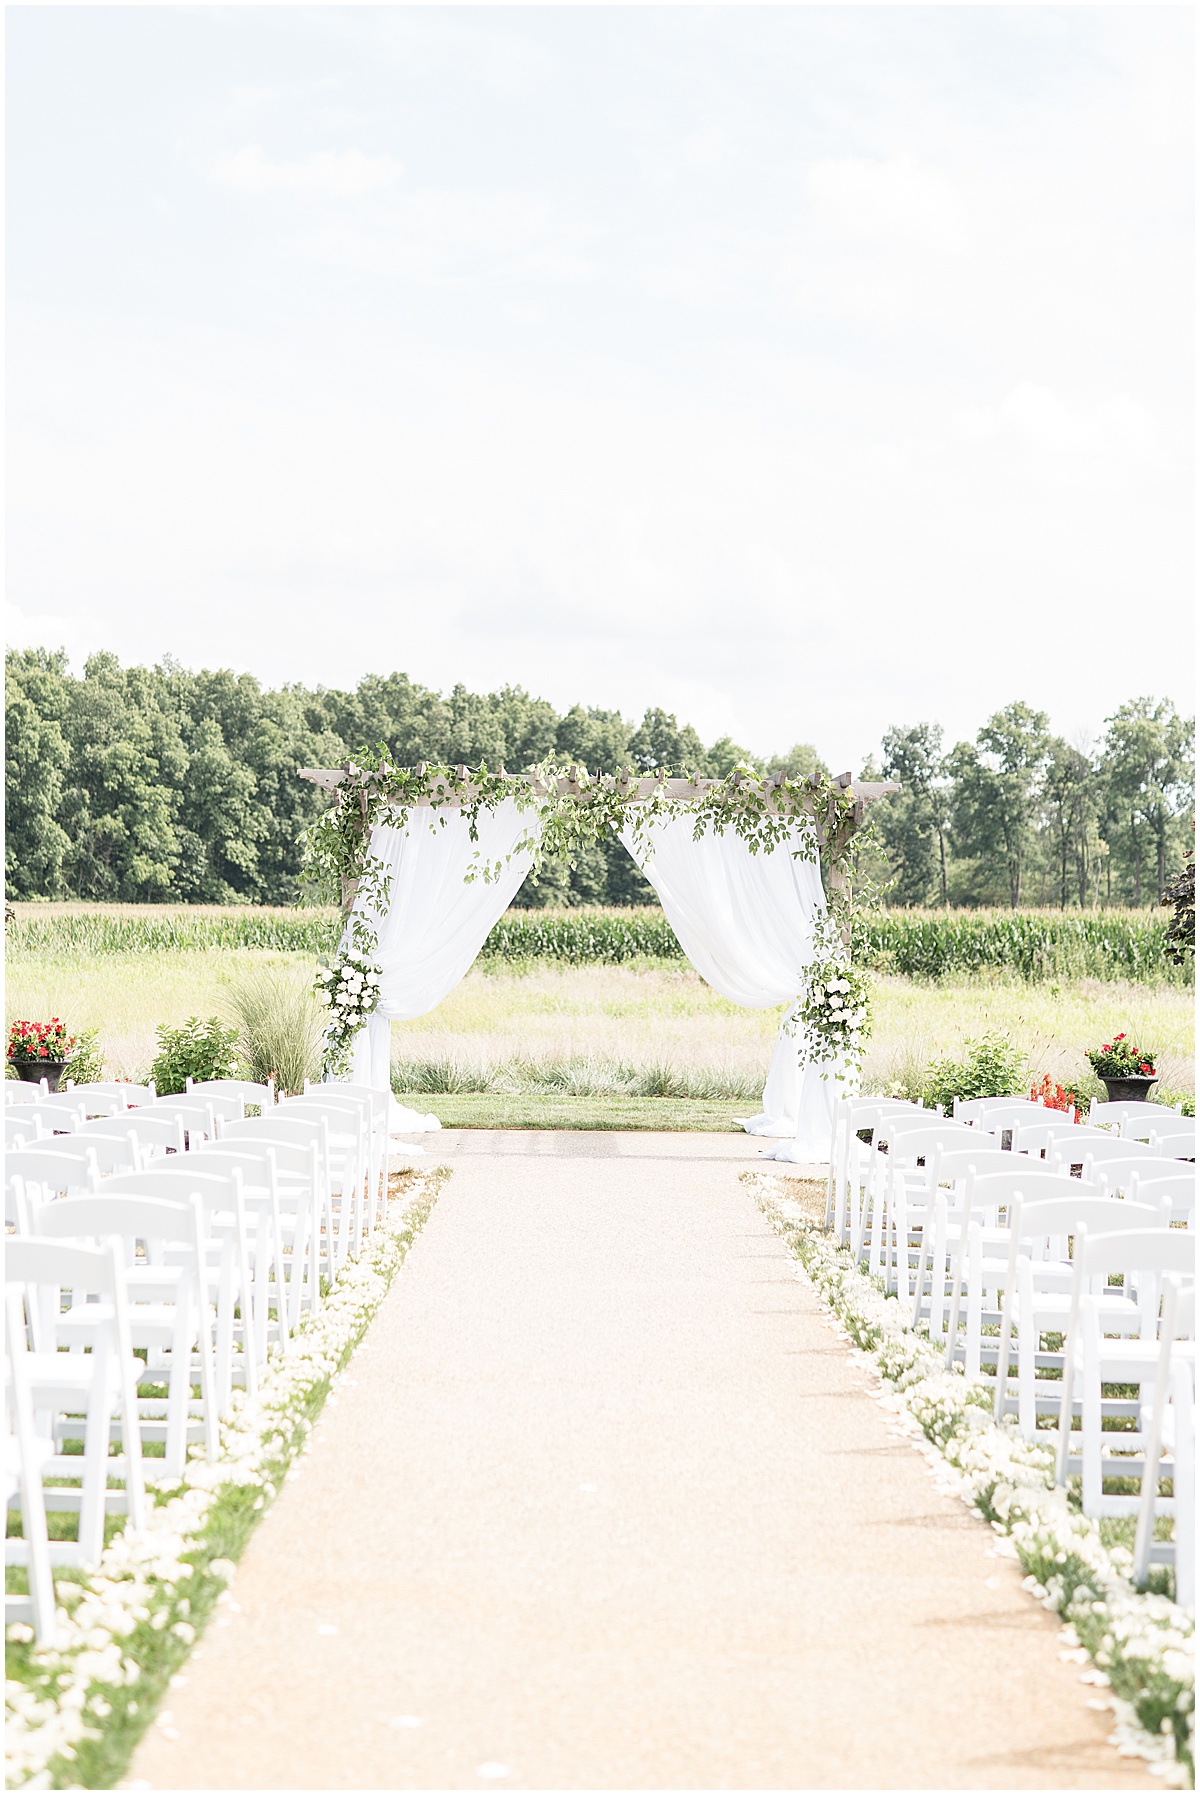 New Journey Farms wedding ceremony in Lafayette, Indiana by Victoria Rayburn Photography